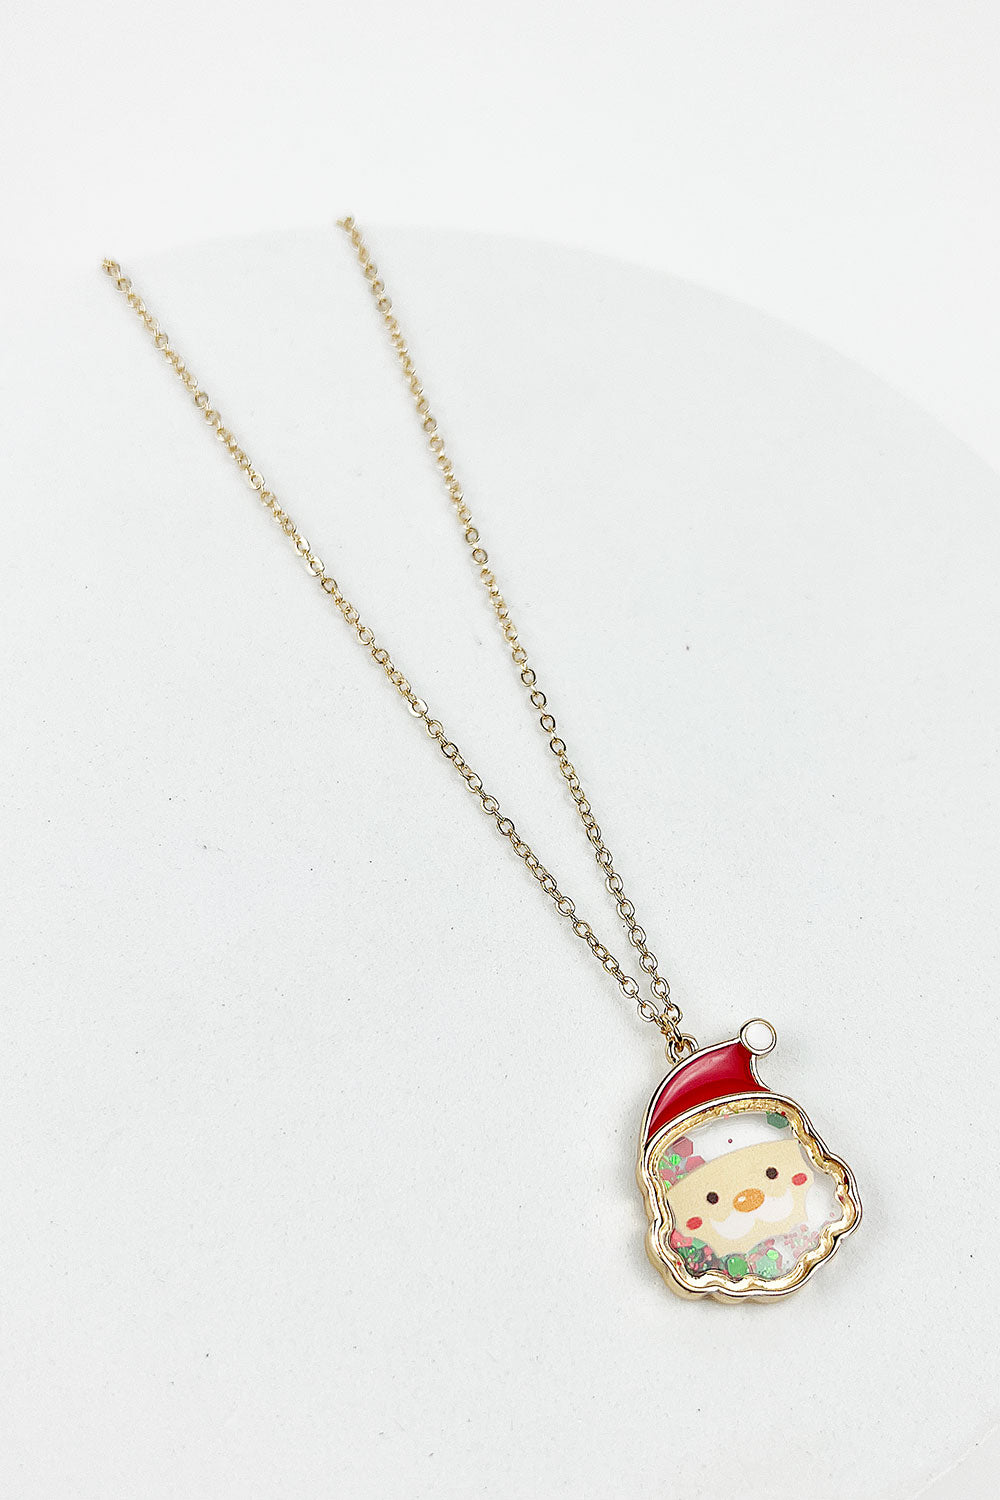 CHRISTMAS SANTA CLAUSE GLITTER SHAKER NECKLACE